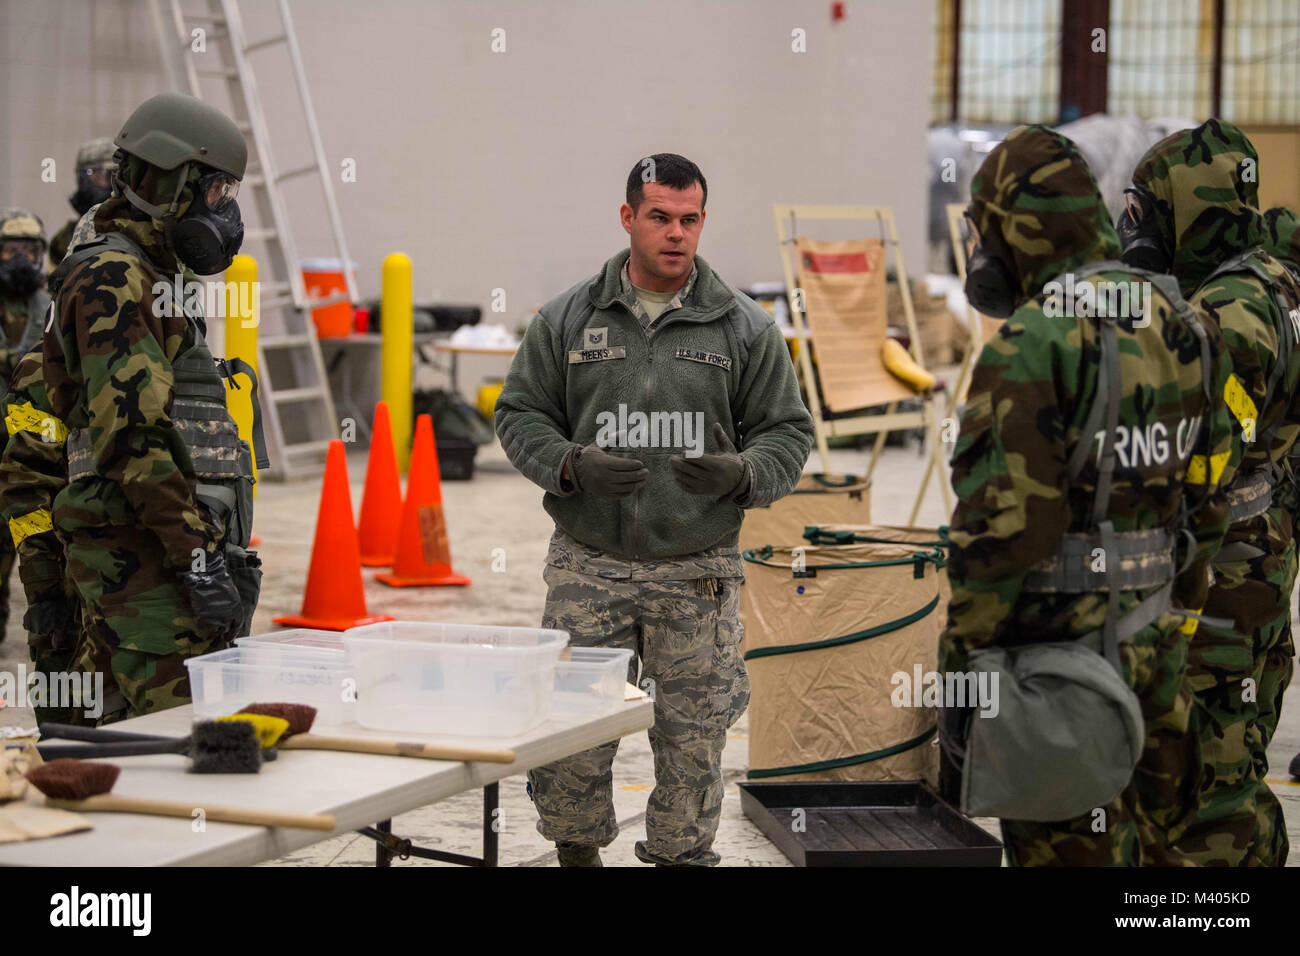 Tech. Sgt. Phillip Meeks explains the process of decontamination in the event of a chemical, biological, radiological, nuclear and explosives (CBRNE) attack during training Feb. 4, 2018 at McLaughlin Air National Guard Base, Charleston, West Virginia. 130th Airman trained over drill weekend in various disciplines to improve their overall readiness in the event of an attack at home or abroad. (U.S. Air National Guard photo by Tech. Sgt. De-Juan Haley) Stock Photo